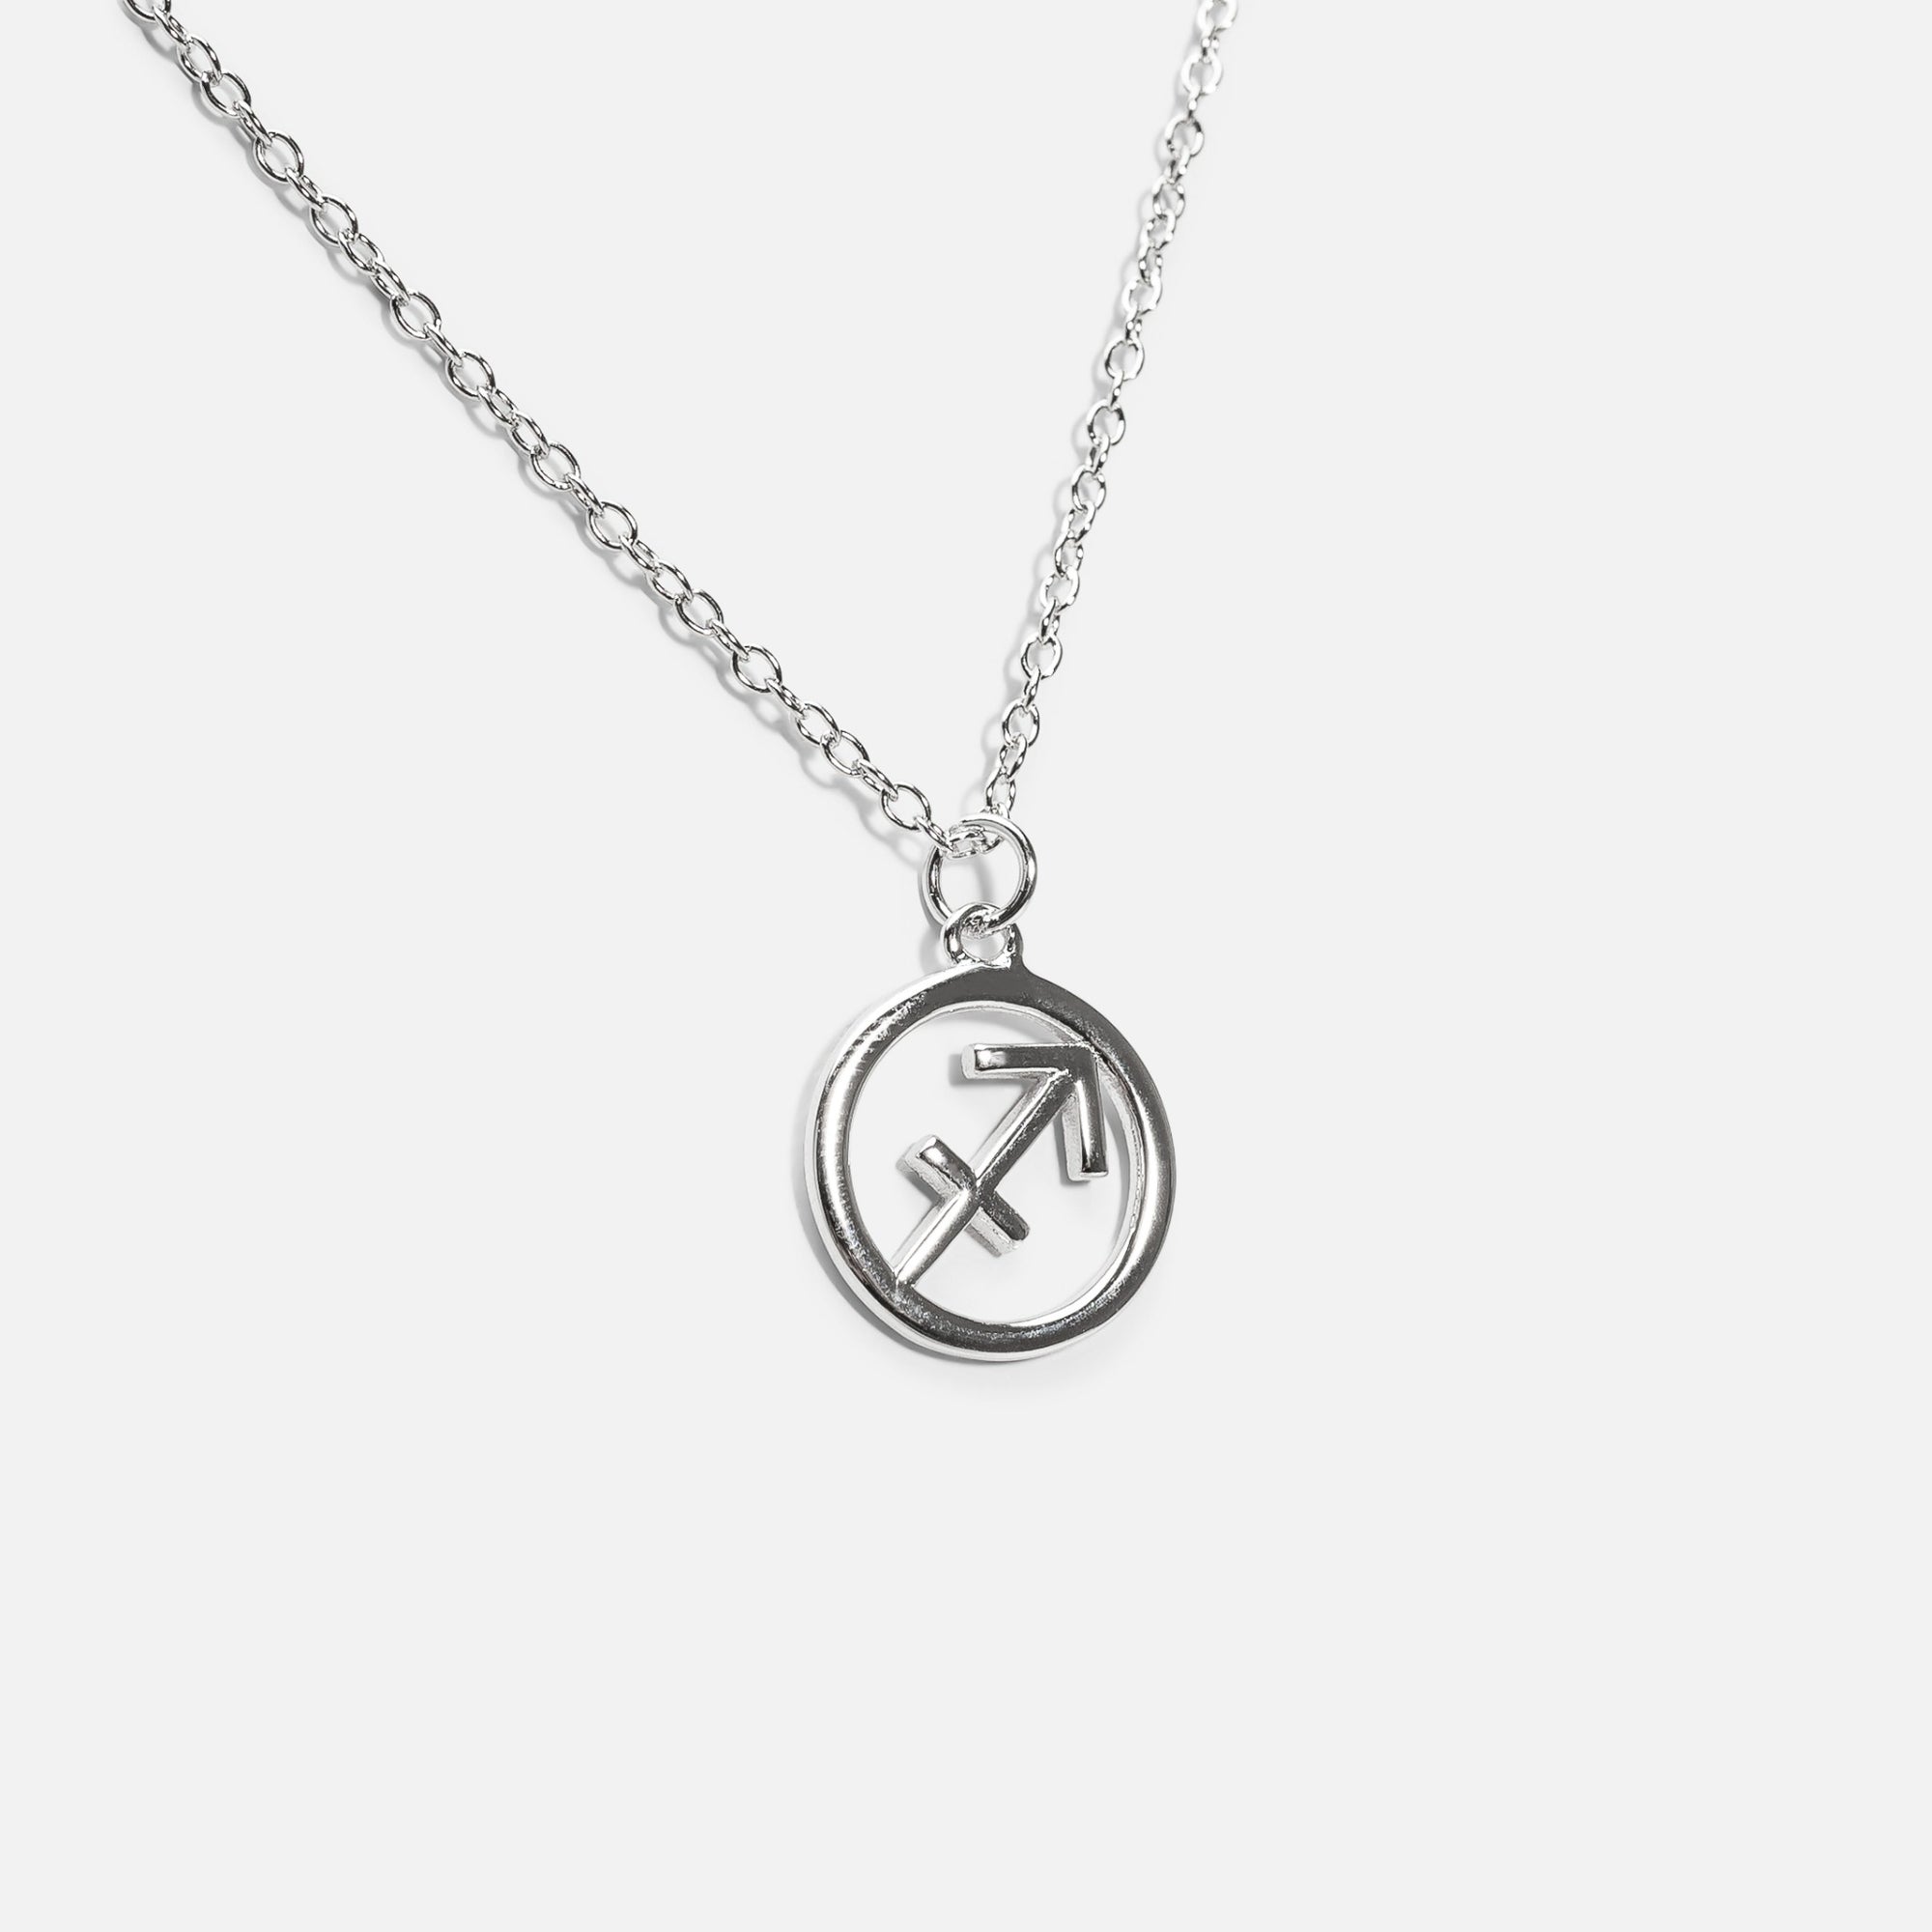 Sterling silver pendant with sagittarius zodiac sign